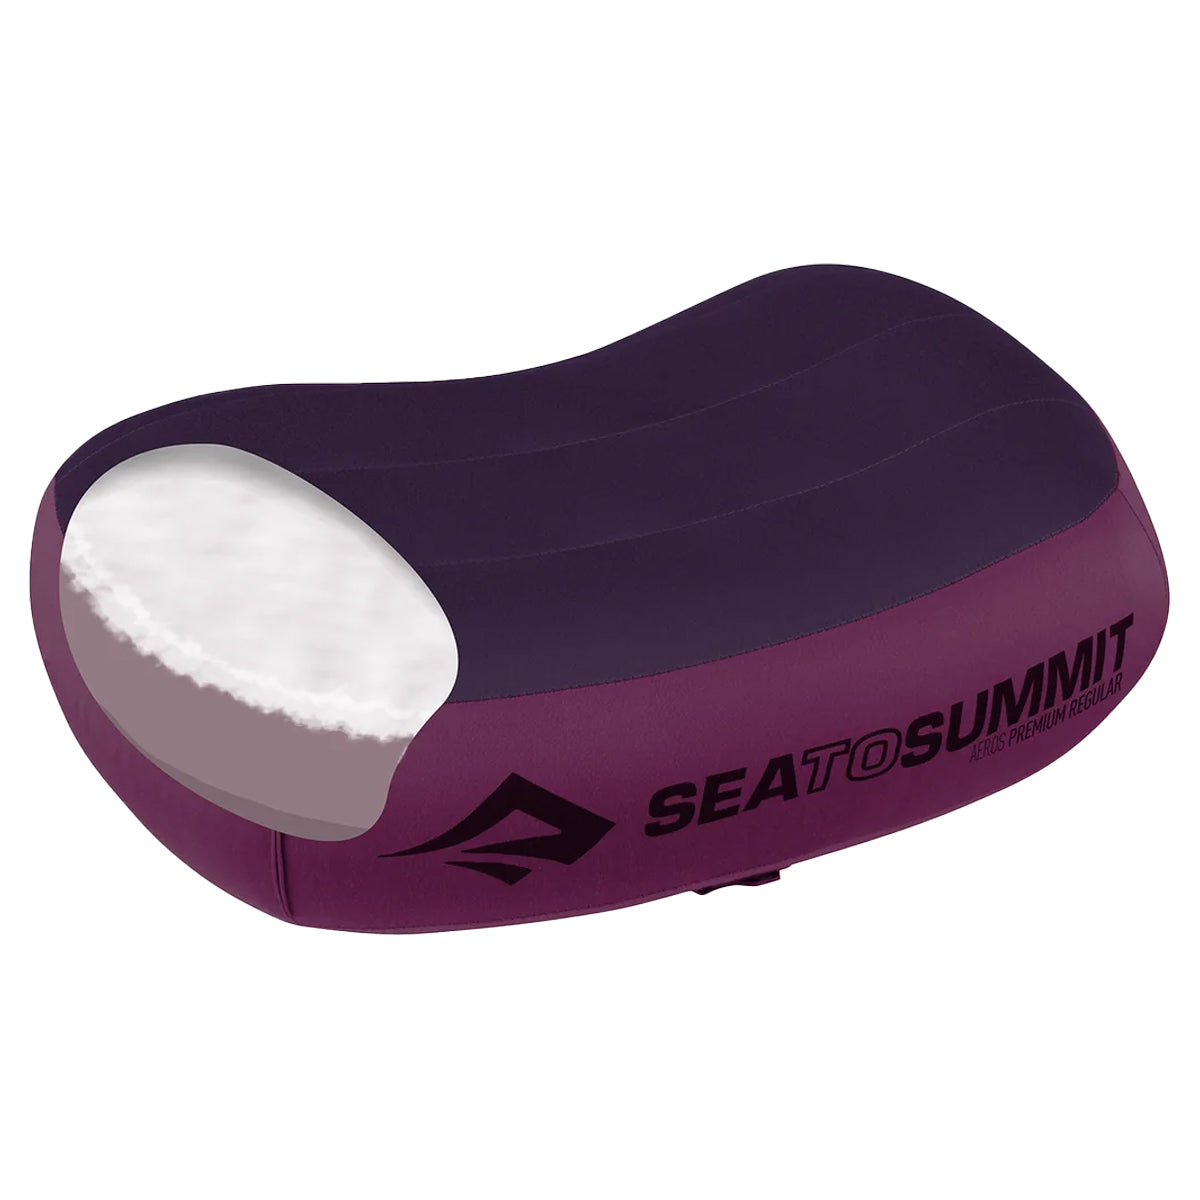 Sea to Summit Aeros Premium Camp Pillow in  by GOHUNT | Sea to Summit - GOHUNT Shop